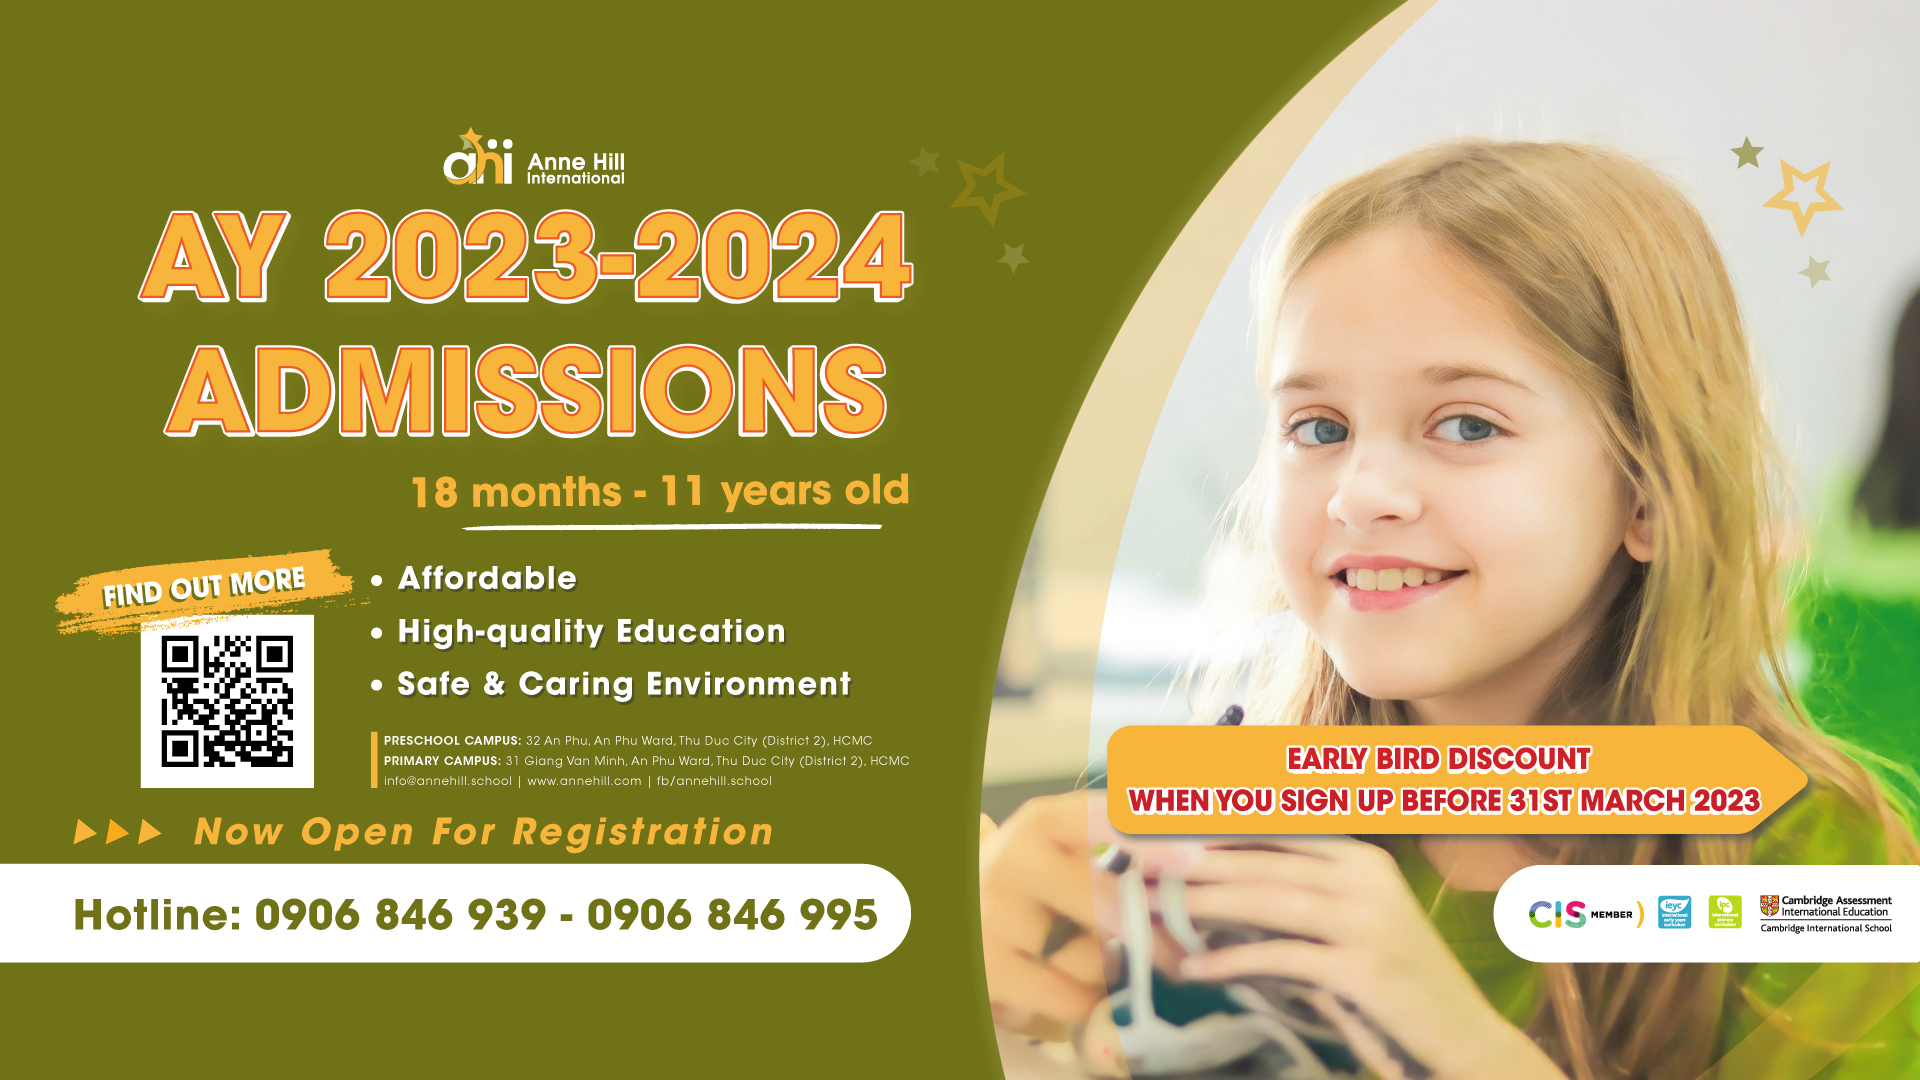 [ANNE HILL INTERNATIONAL SCHOOL] WE ARE OPEN FOR REGISTRATION AY 2023-2024